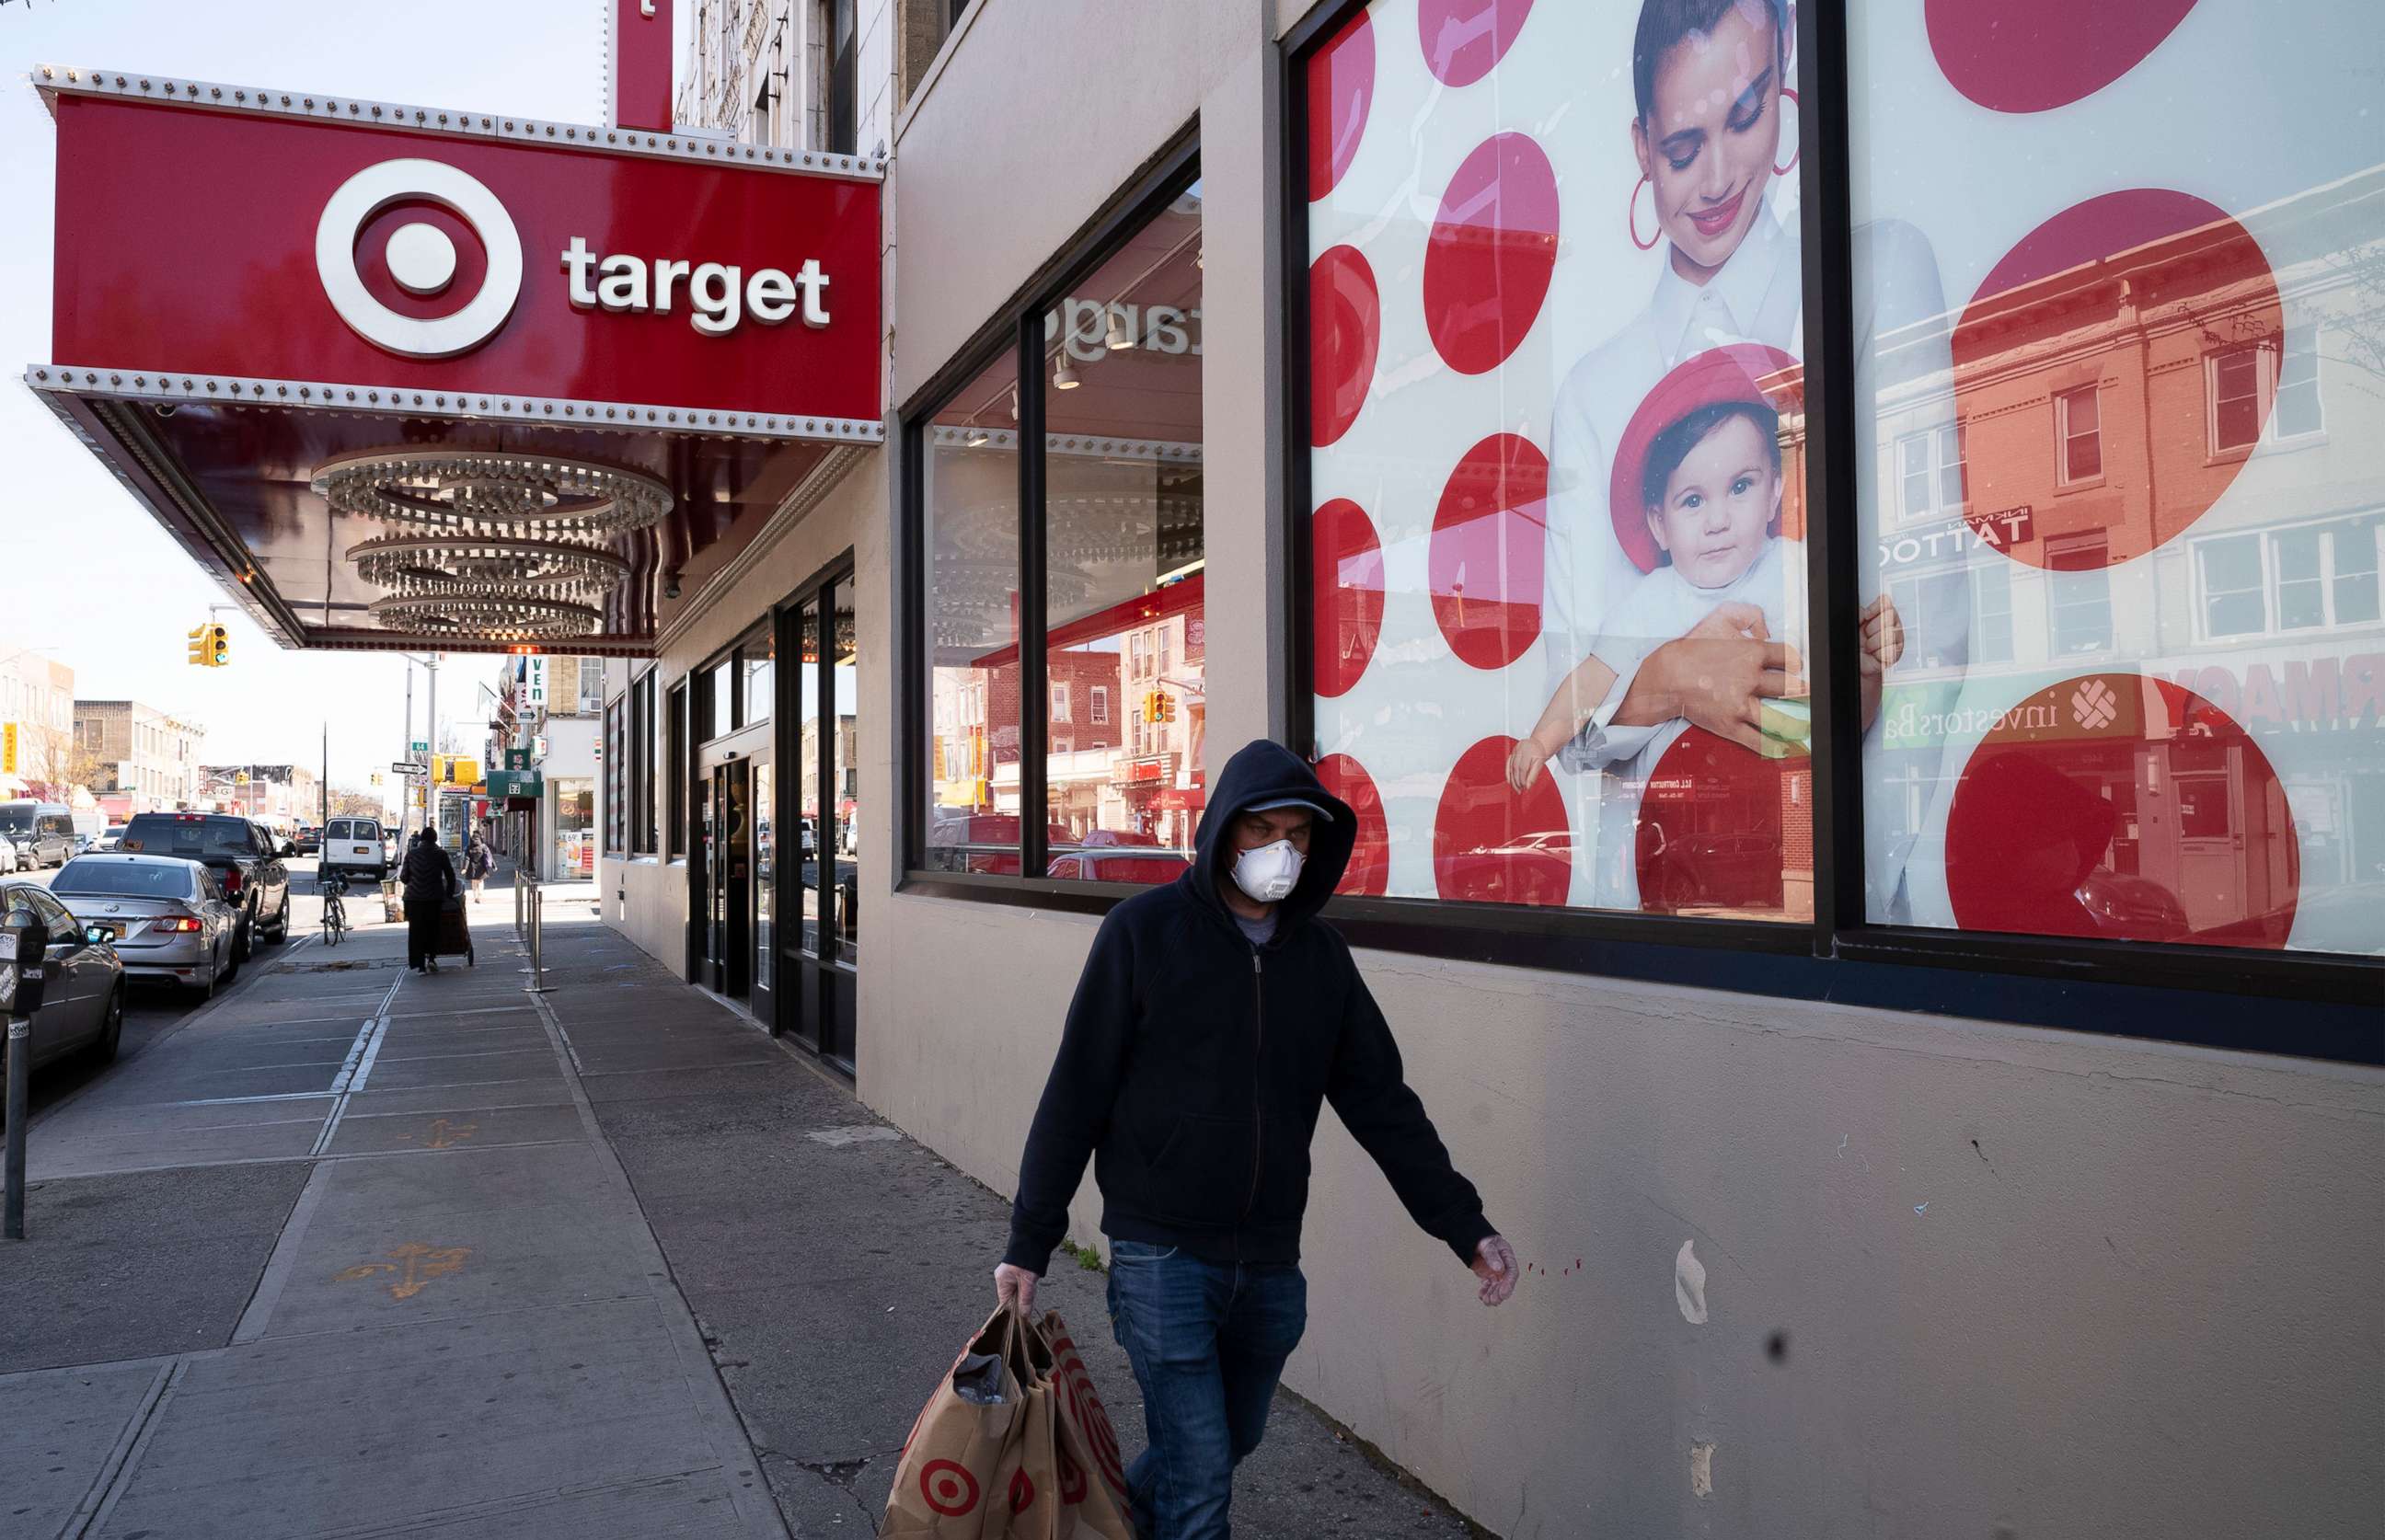 PHOTO: A customer wearing a mask carries his purchases as he leaves a Target store during the coronavirus pandemic, Brooklyn, N.Y., April 6, 2020.